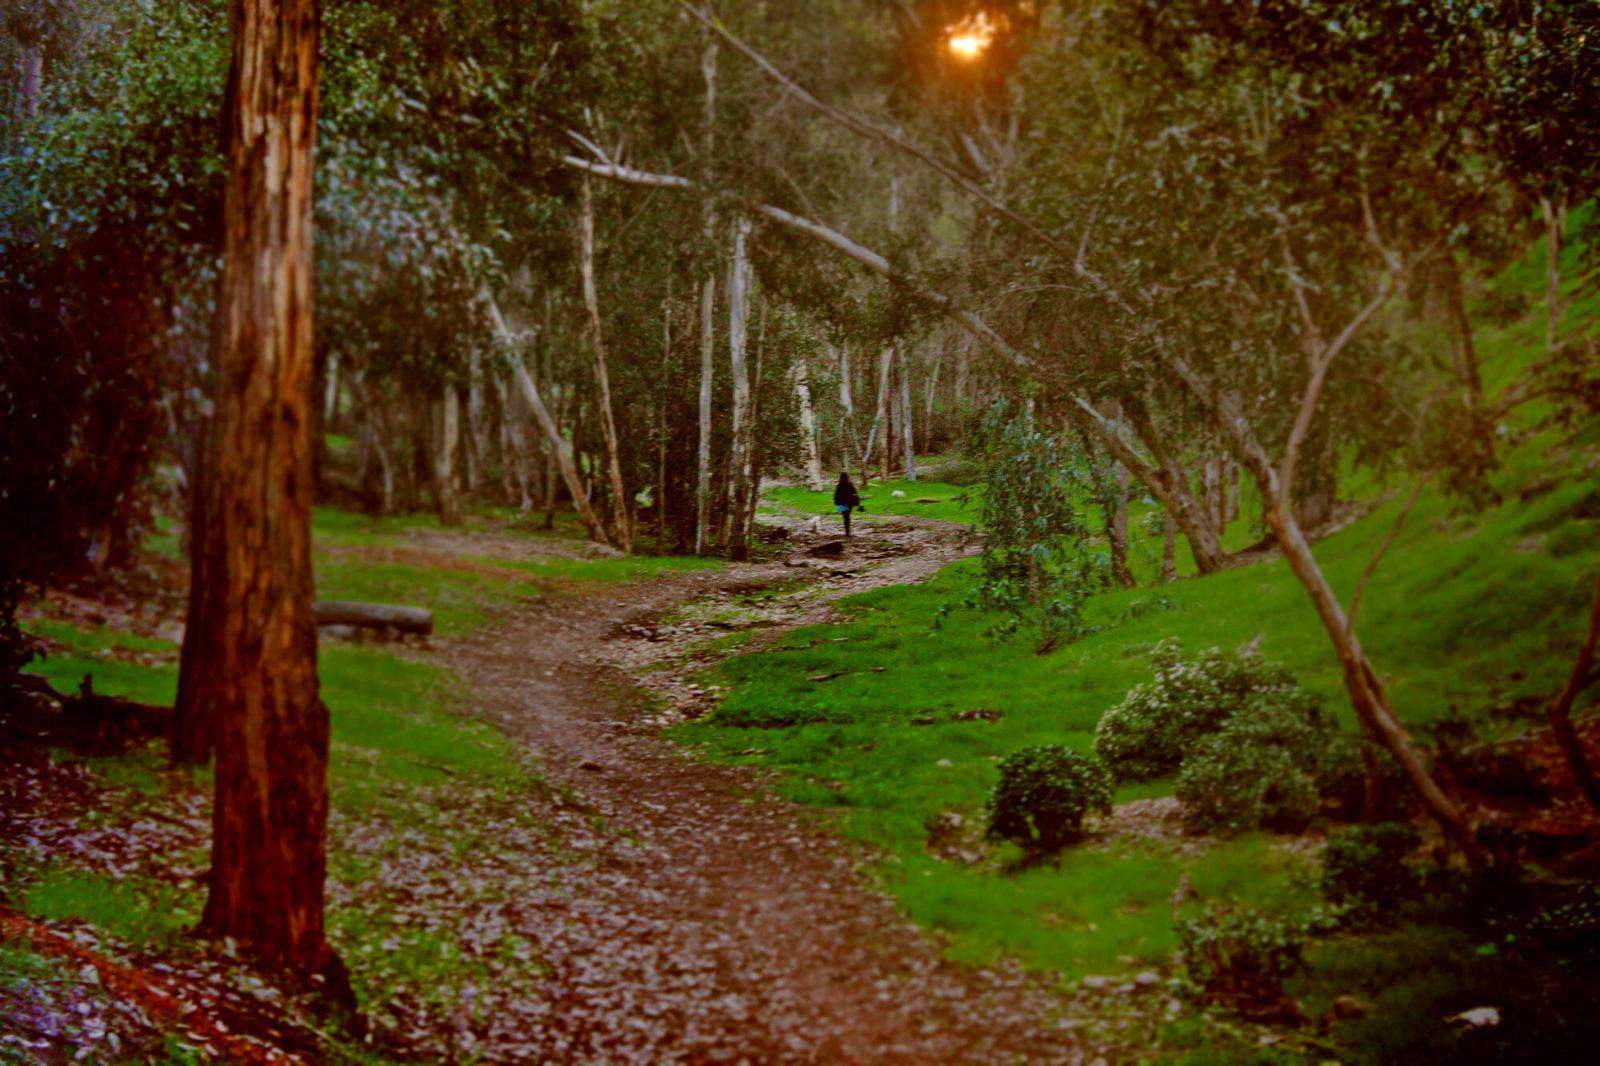 Hike in the woods at Hoyt Park. This is one of Scripps Ranch's many forested trails, shading you with eucalyptus trees.